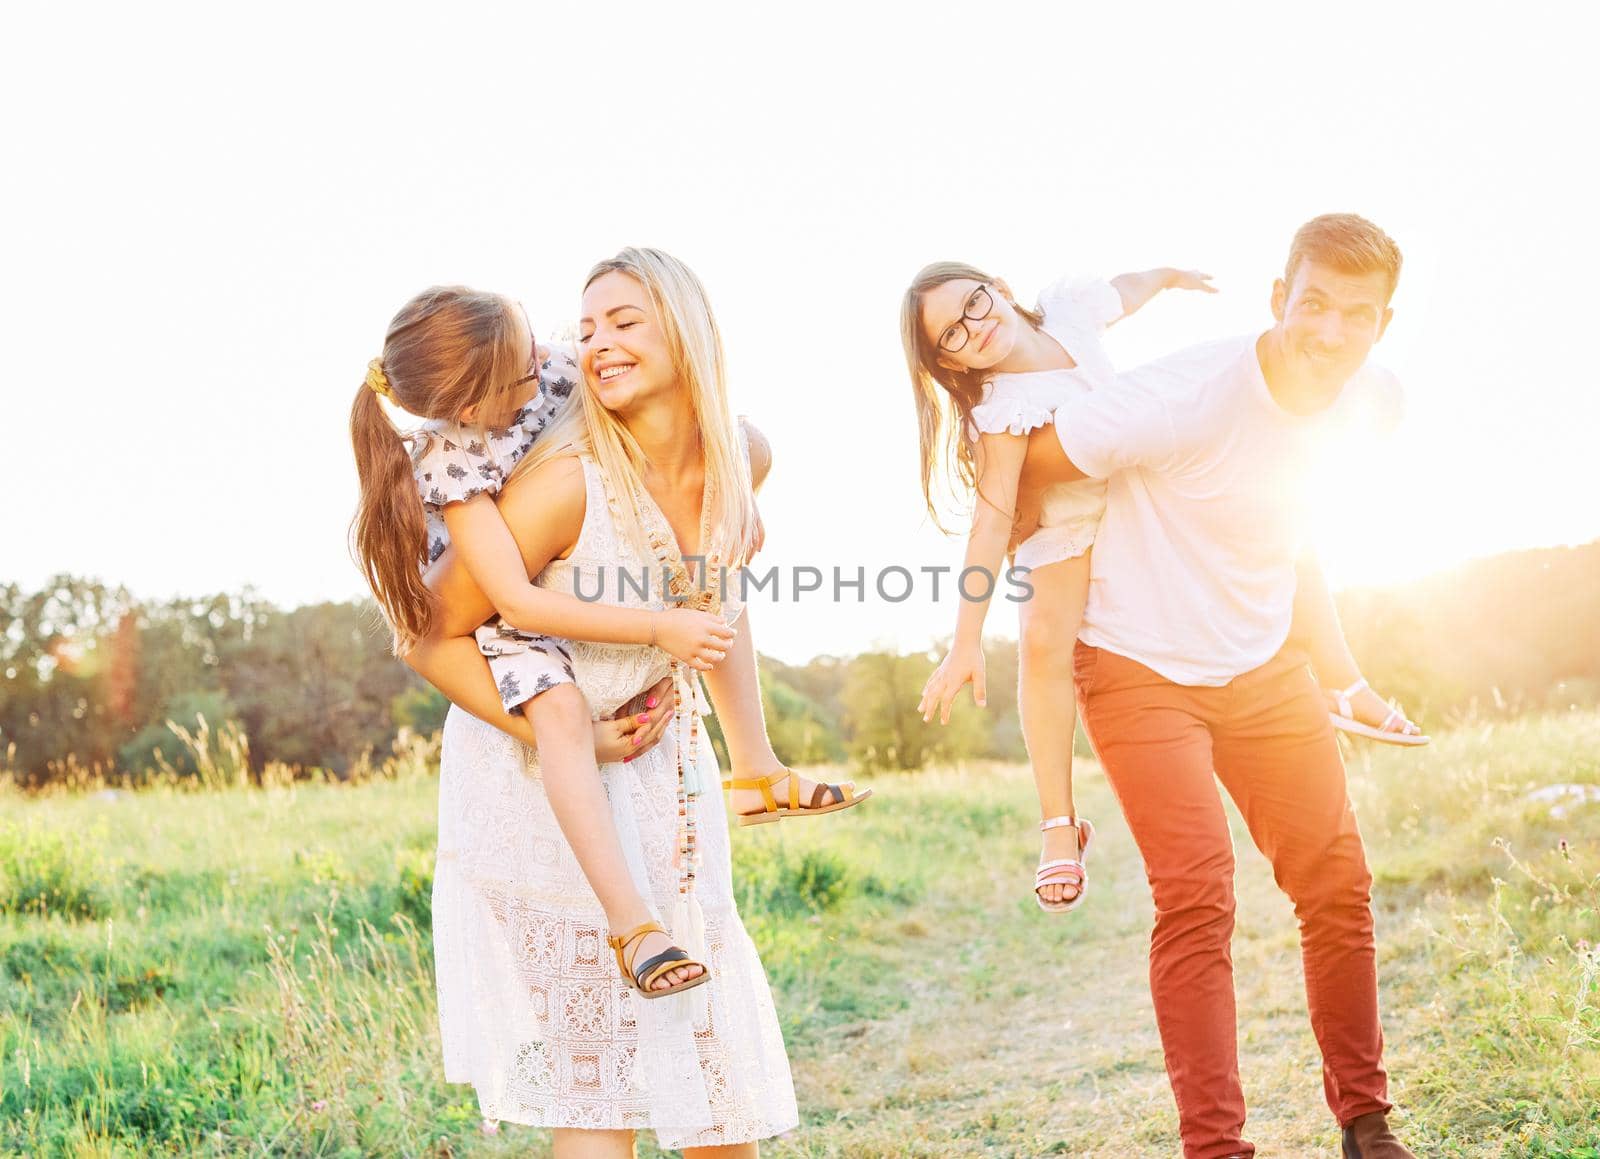 Portrait of a young happy family having fun outdoors